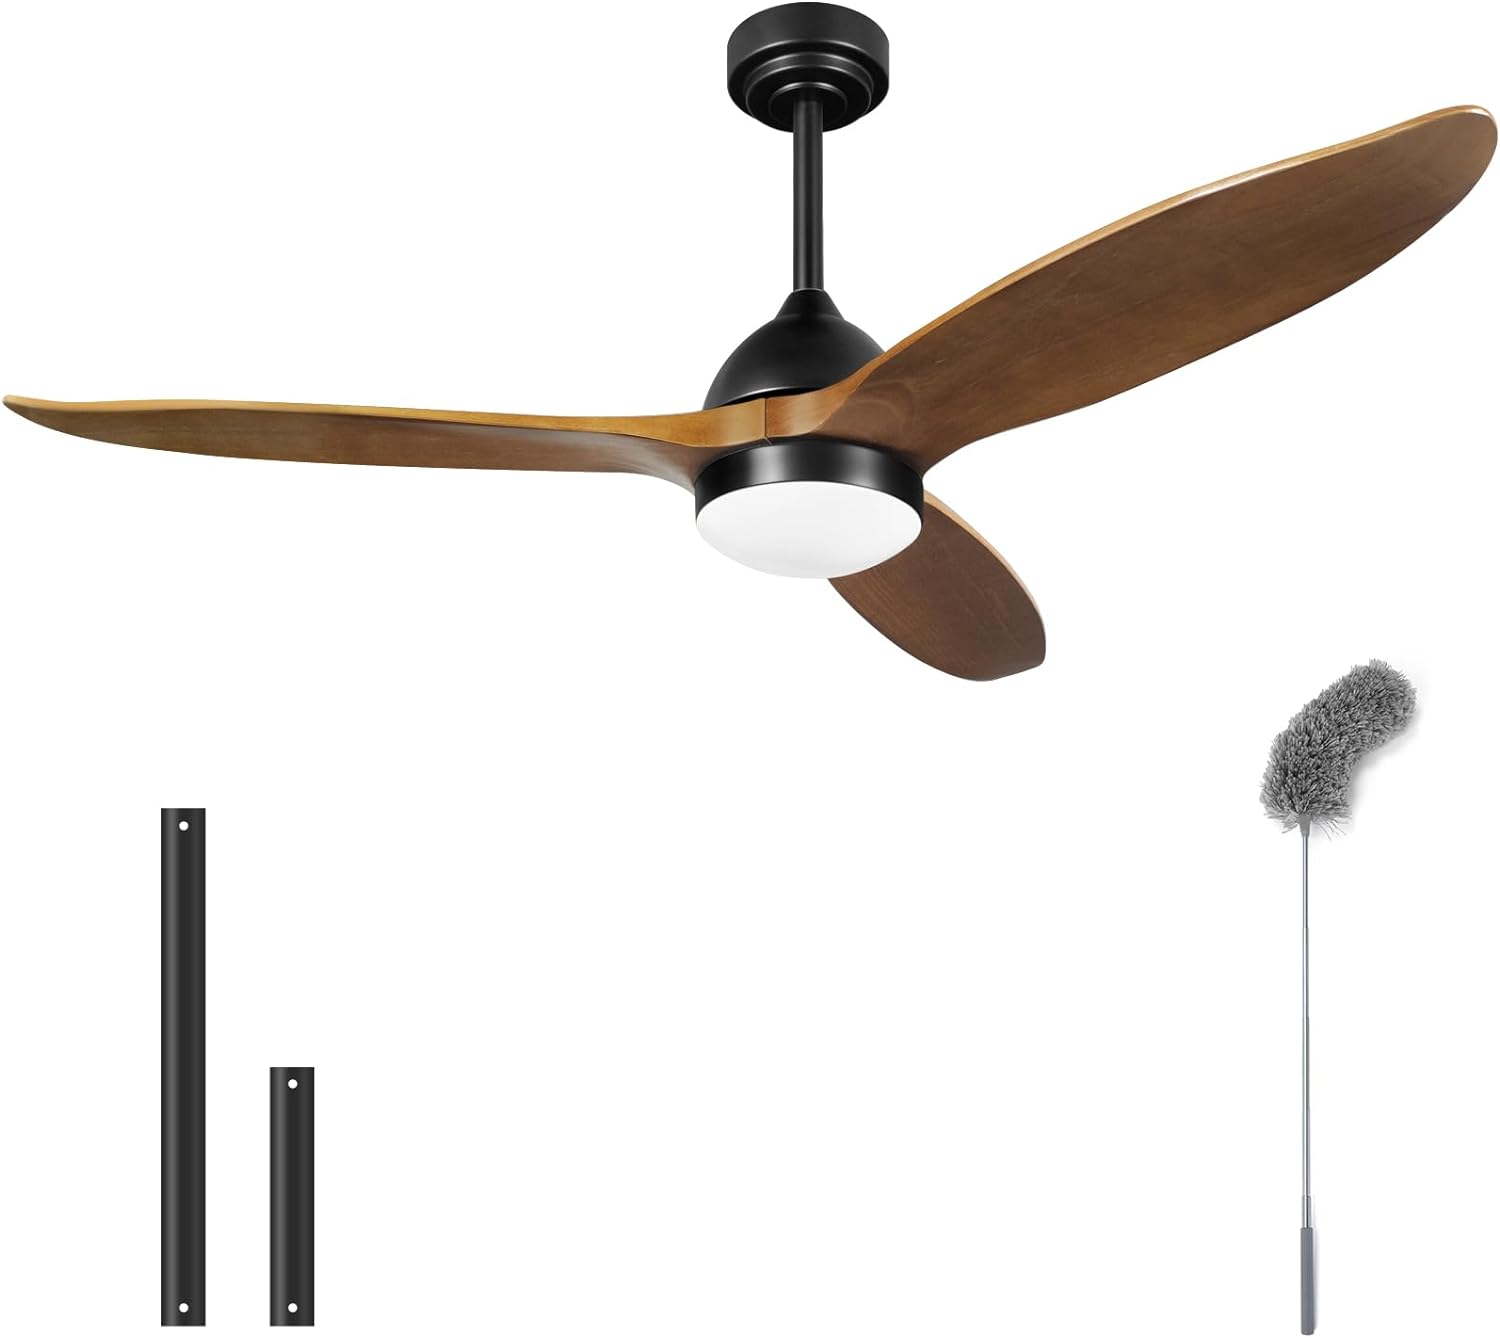 52 Outdoor Wood Ceiling Fan with Lights & Remote Control - Quiet Reversible DC Motor, Dimmable 3 Colors, 6 Speeds - Modern Ceiling Fans for Bedroom Living Room Outdoor Patio(3 blades)